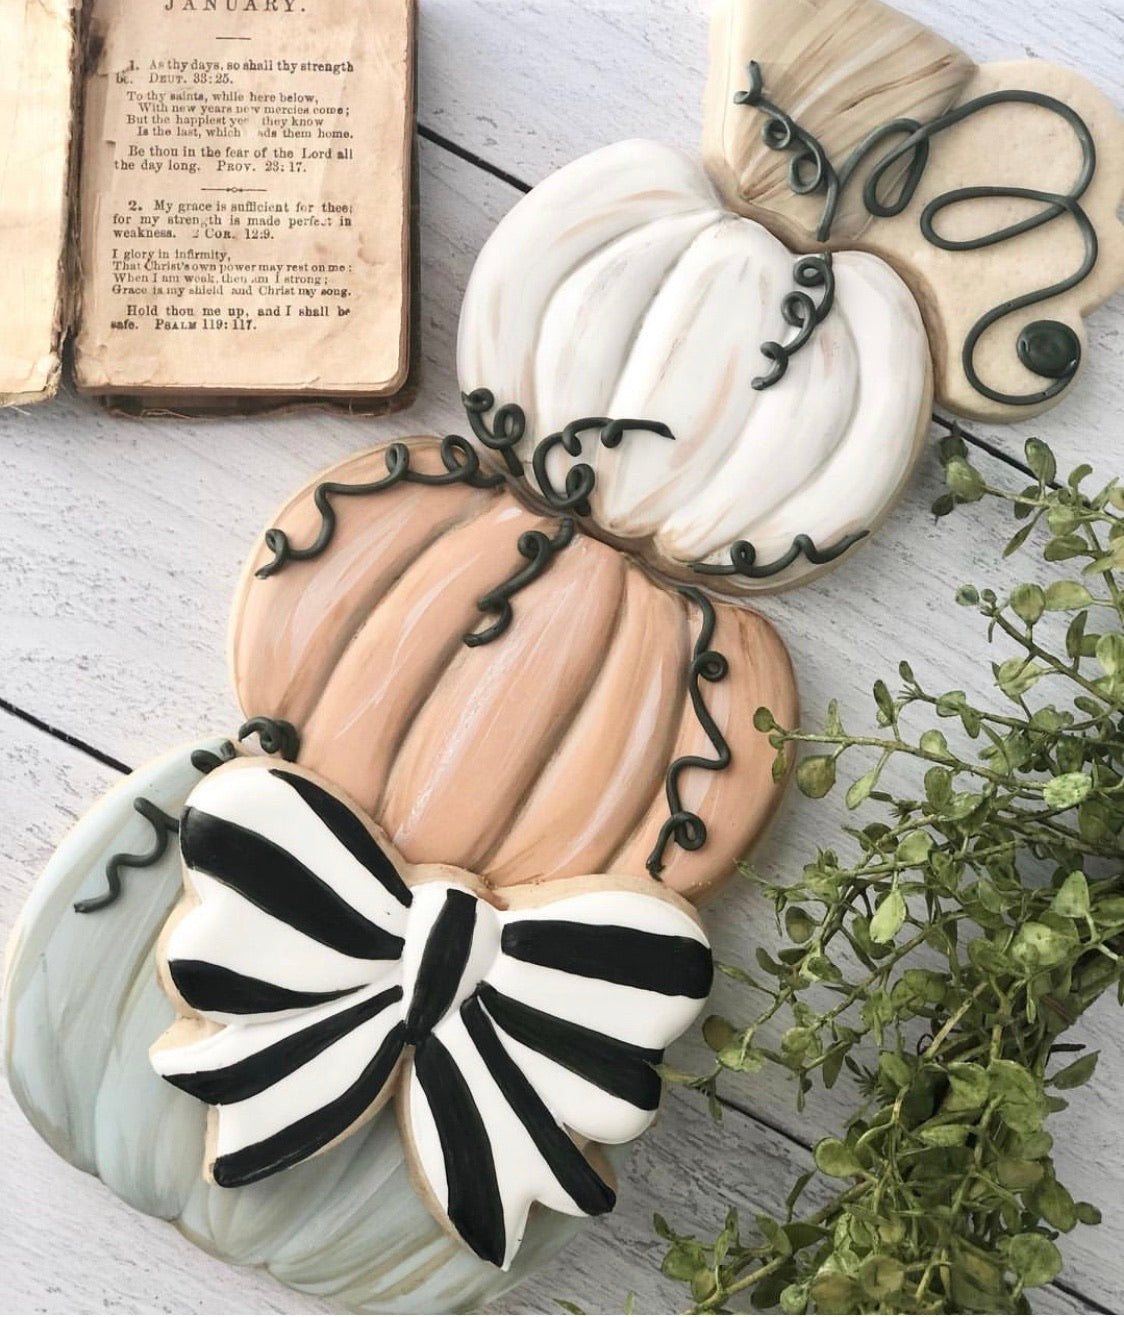 Stacked Pumpkin Set - 4 Cookie Cutters